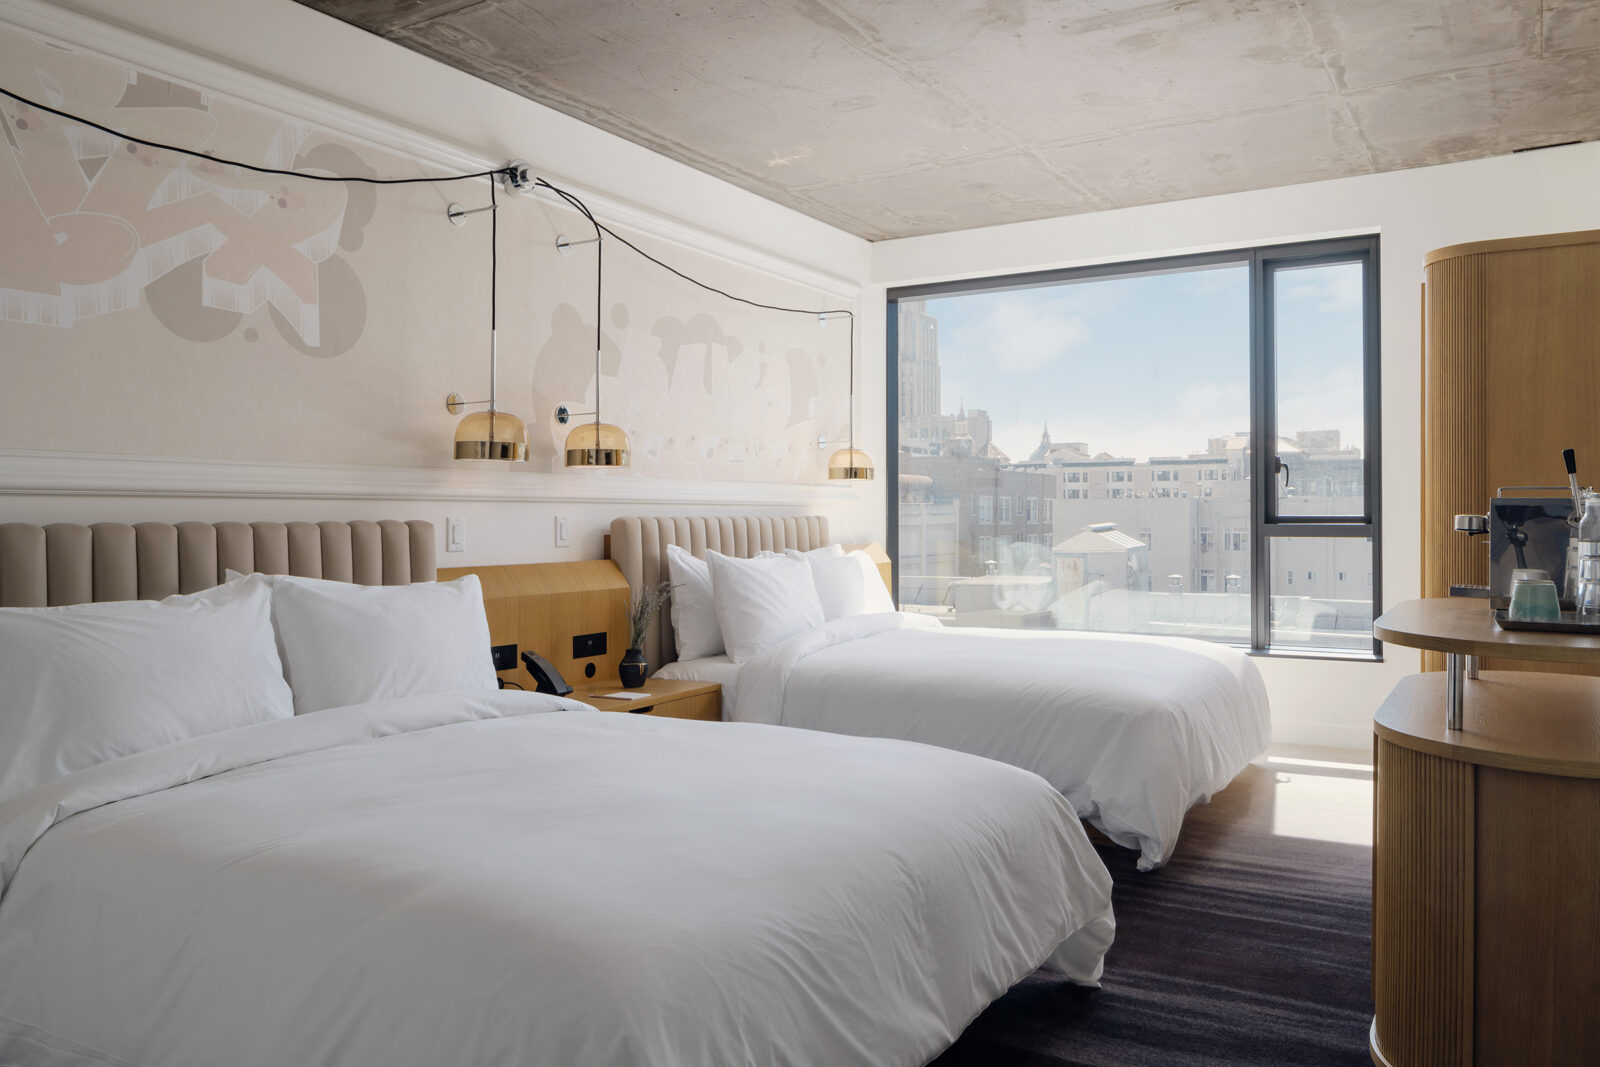 Two king-sized beds positioned near the long glass window, offering a fabulous view of the city.